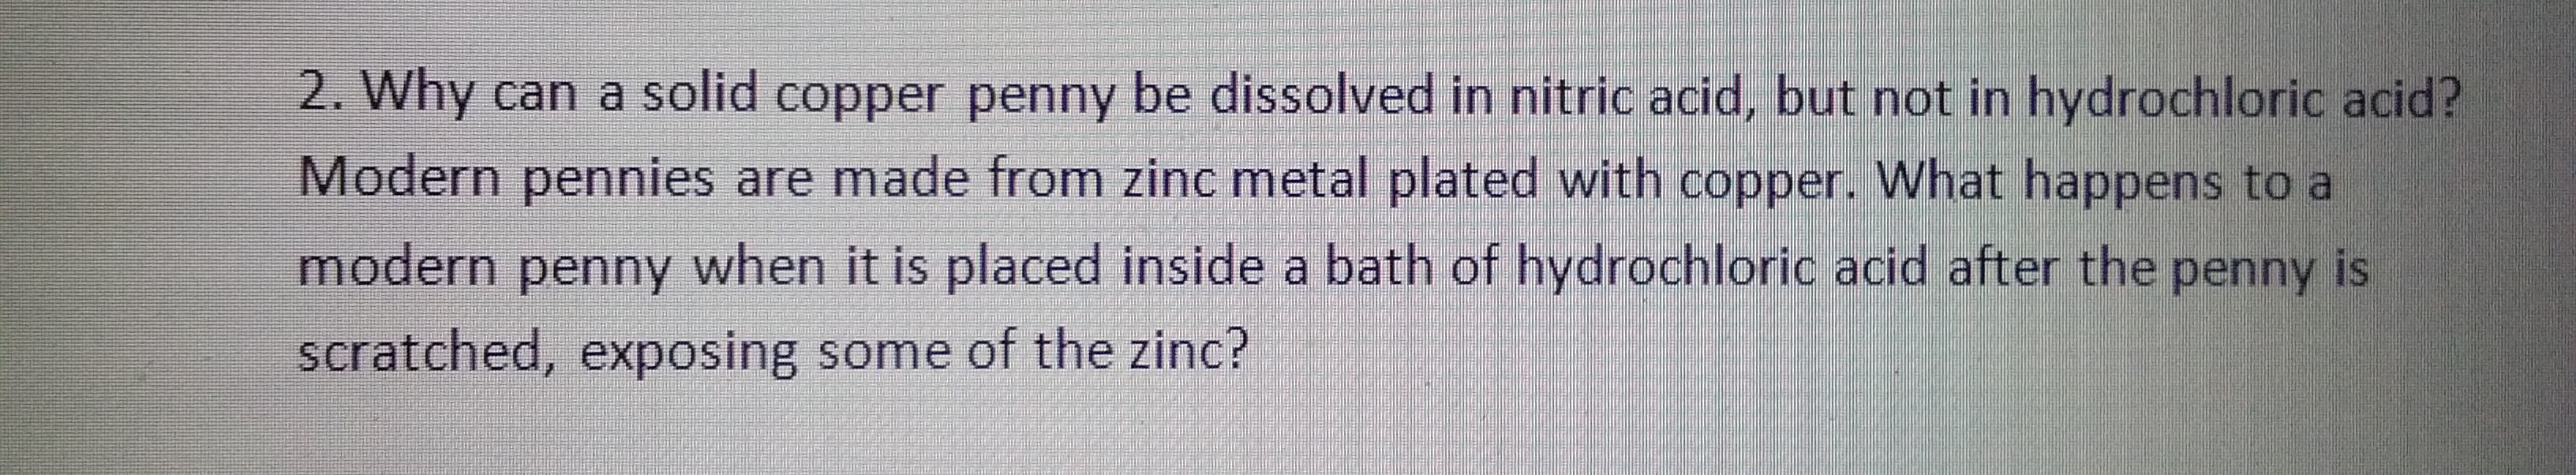 2. Why can a solid copper penny be dissolved in nitric acid, but not in hydrochloric acid?
Modern pennies are made from zinc metal plated with copper. What happens to a
modern penny when it is placed inside a bath of hydrochloric acid after the penny is
scratched, exposing some of the zinc?
